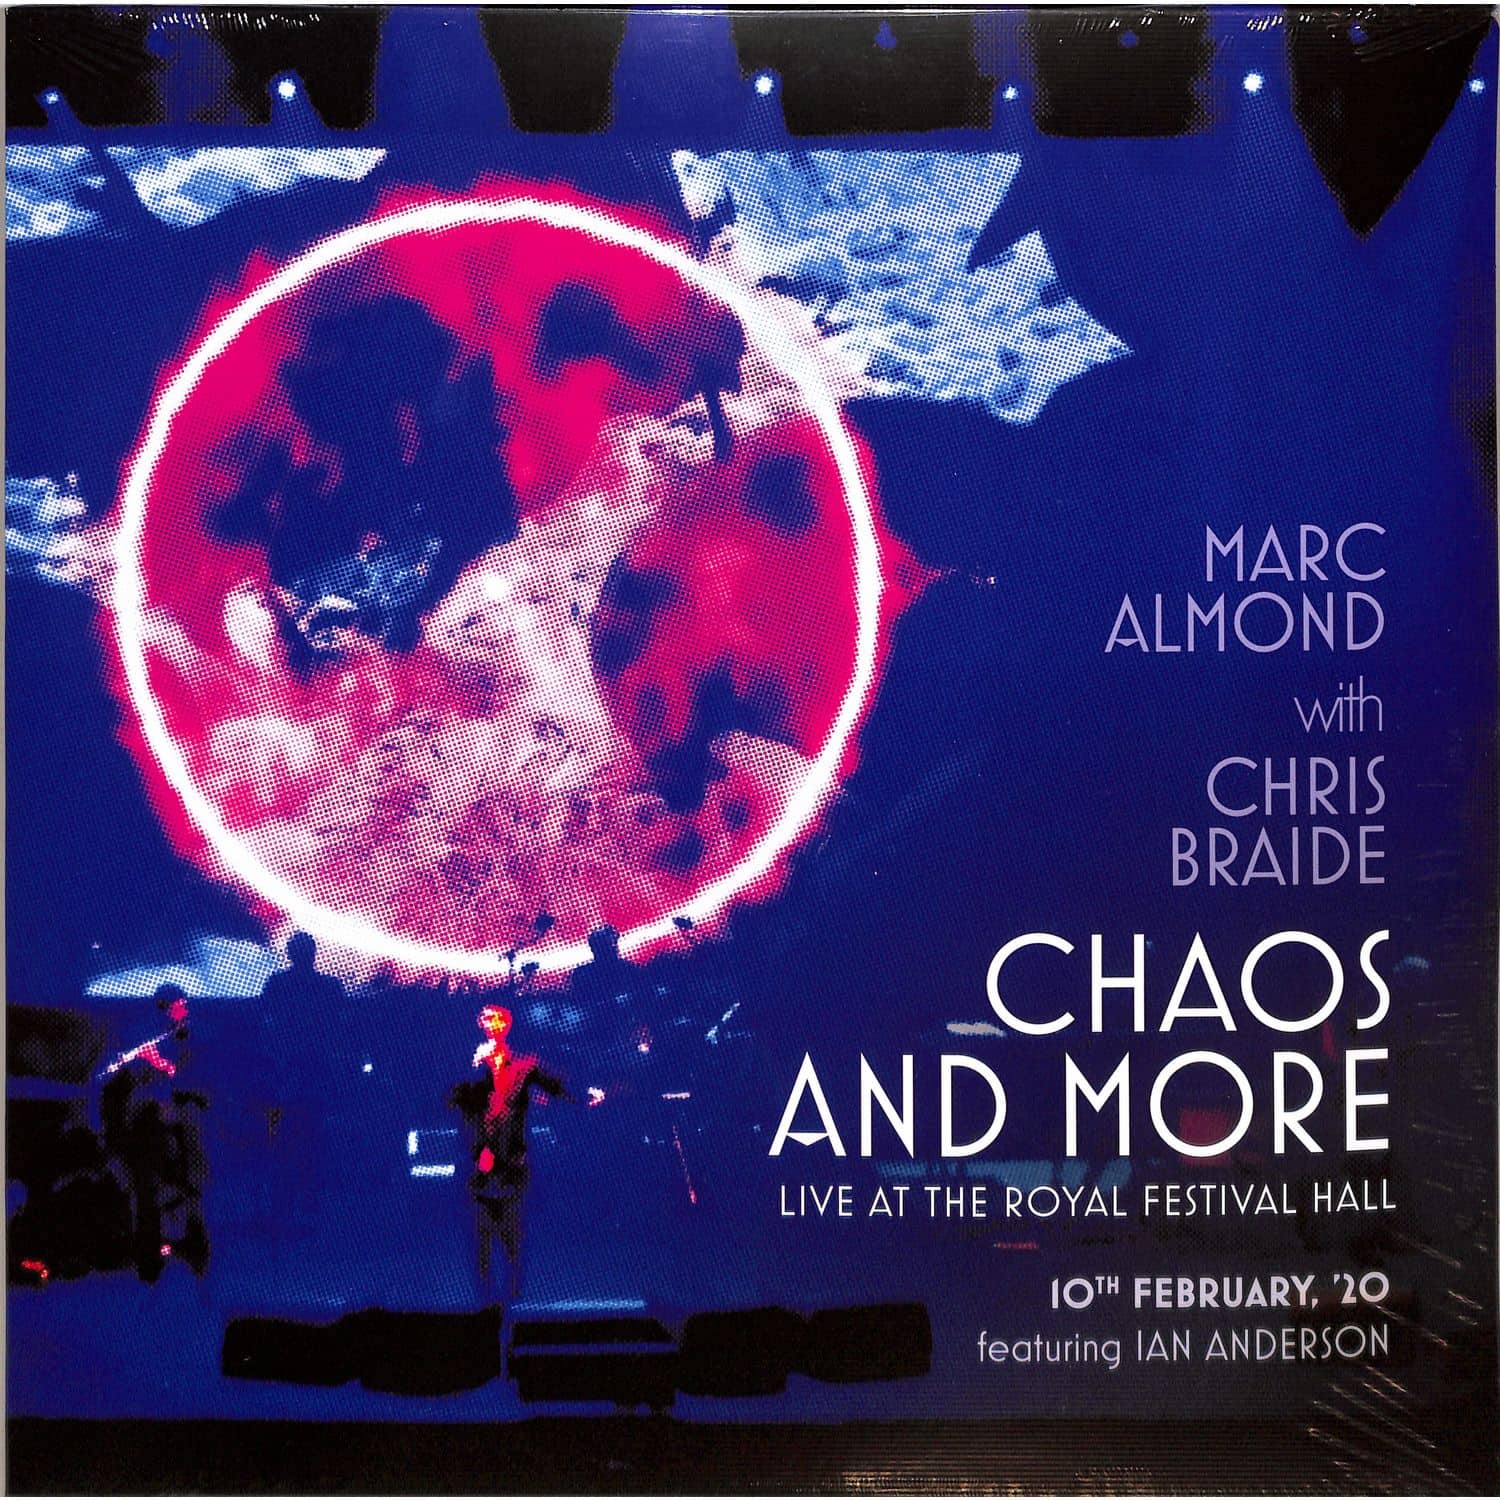 Marc Almond & Chris Braide - CHAOS AND MORE LIVE AT THE ROYAL FESTIVAL HALL 